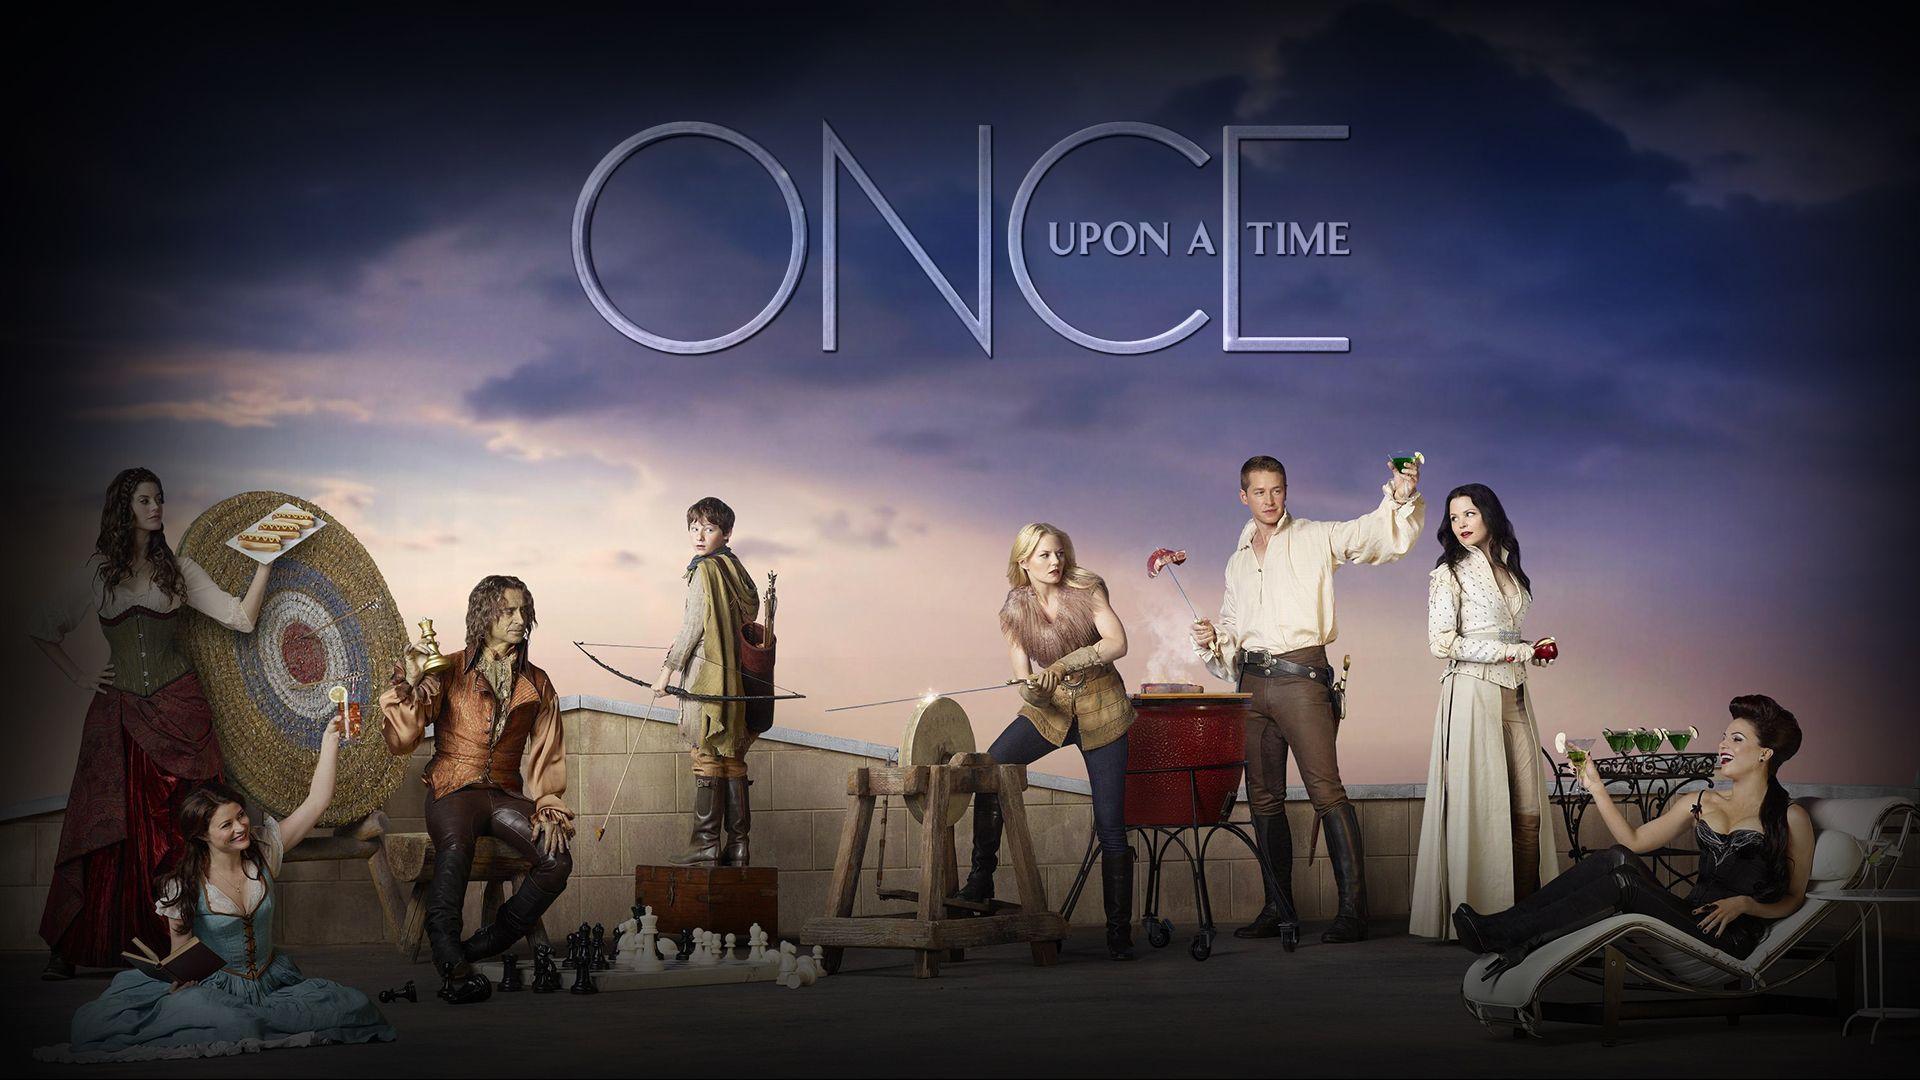 More Like Once Upon a Time Wallpaper 8